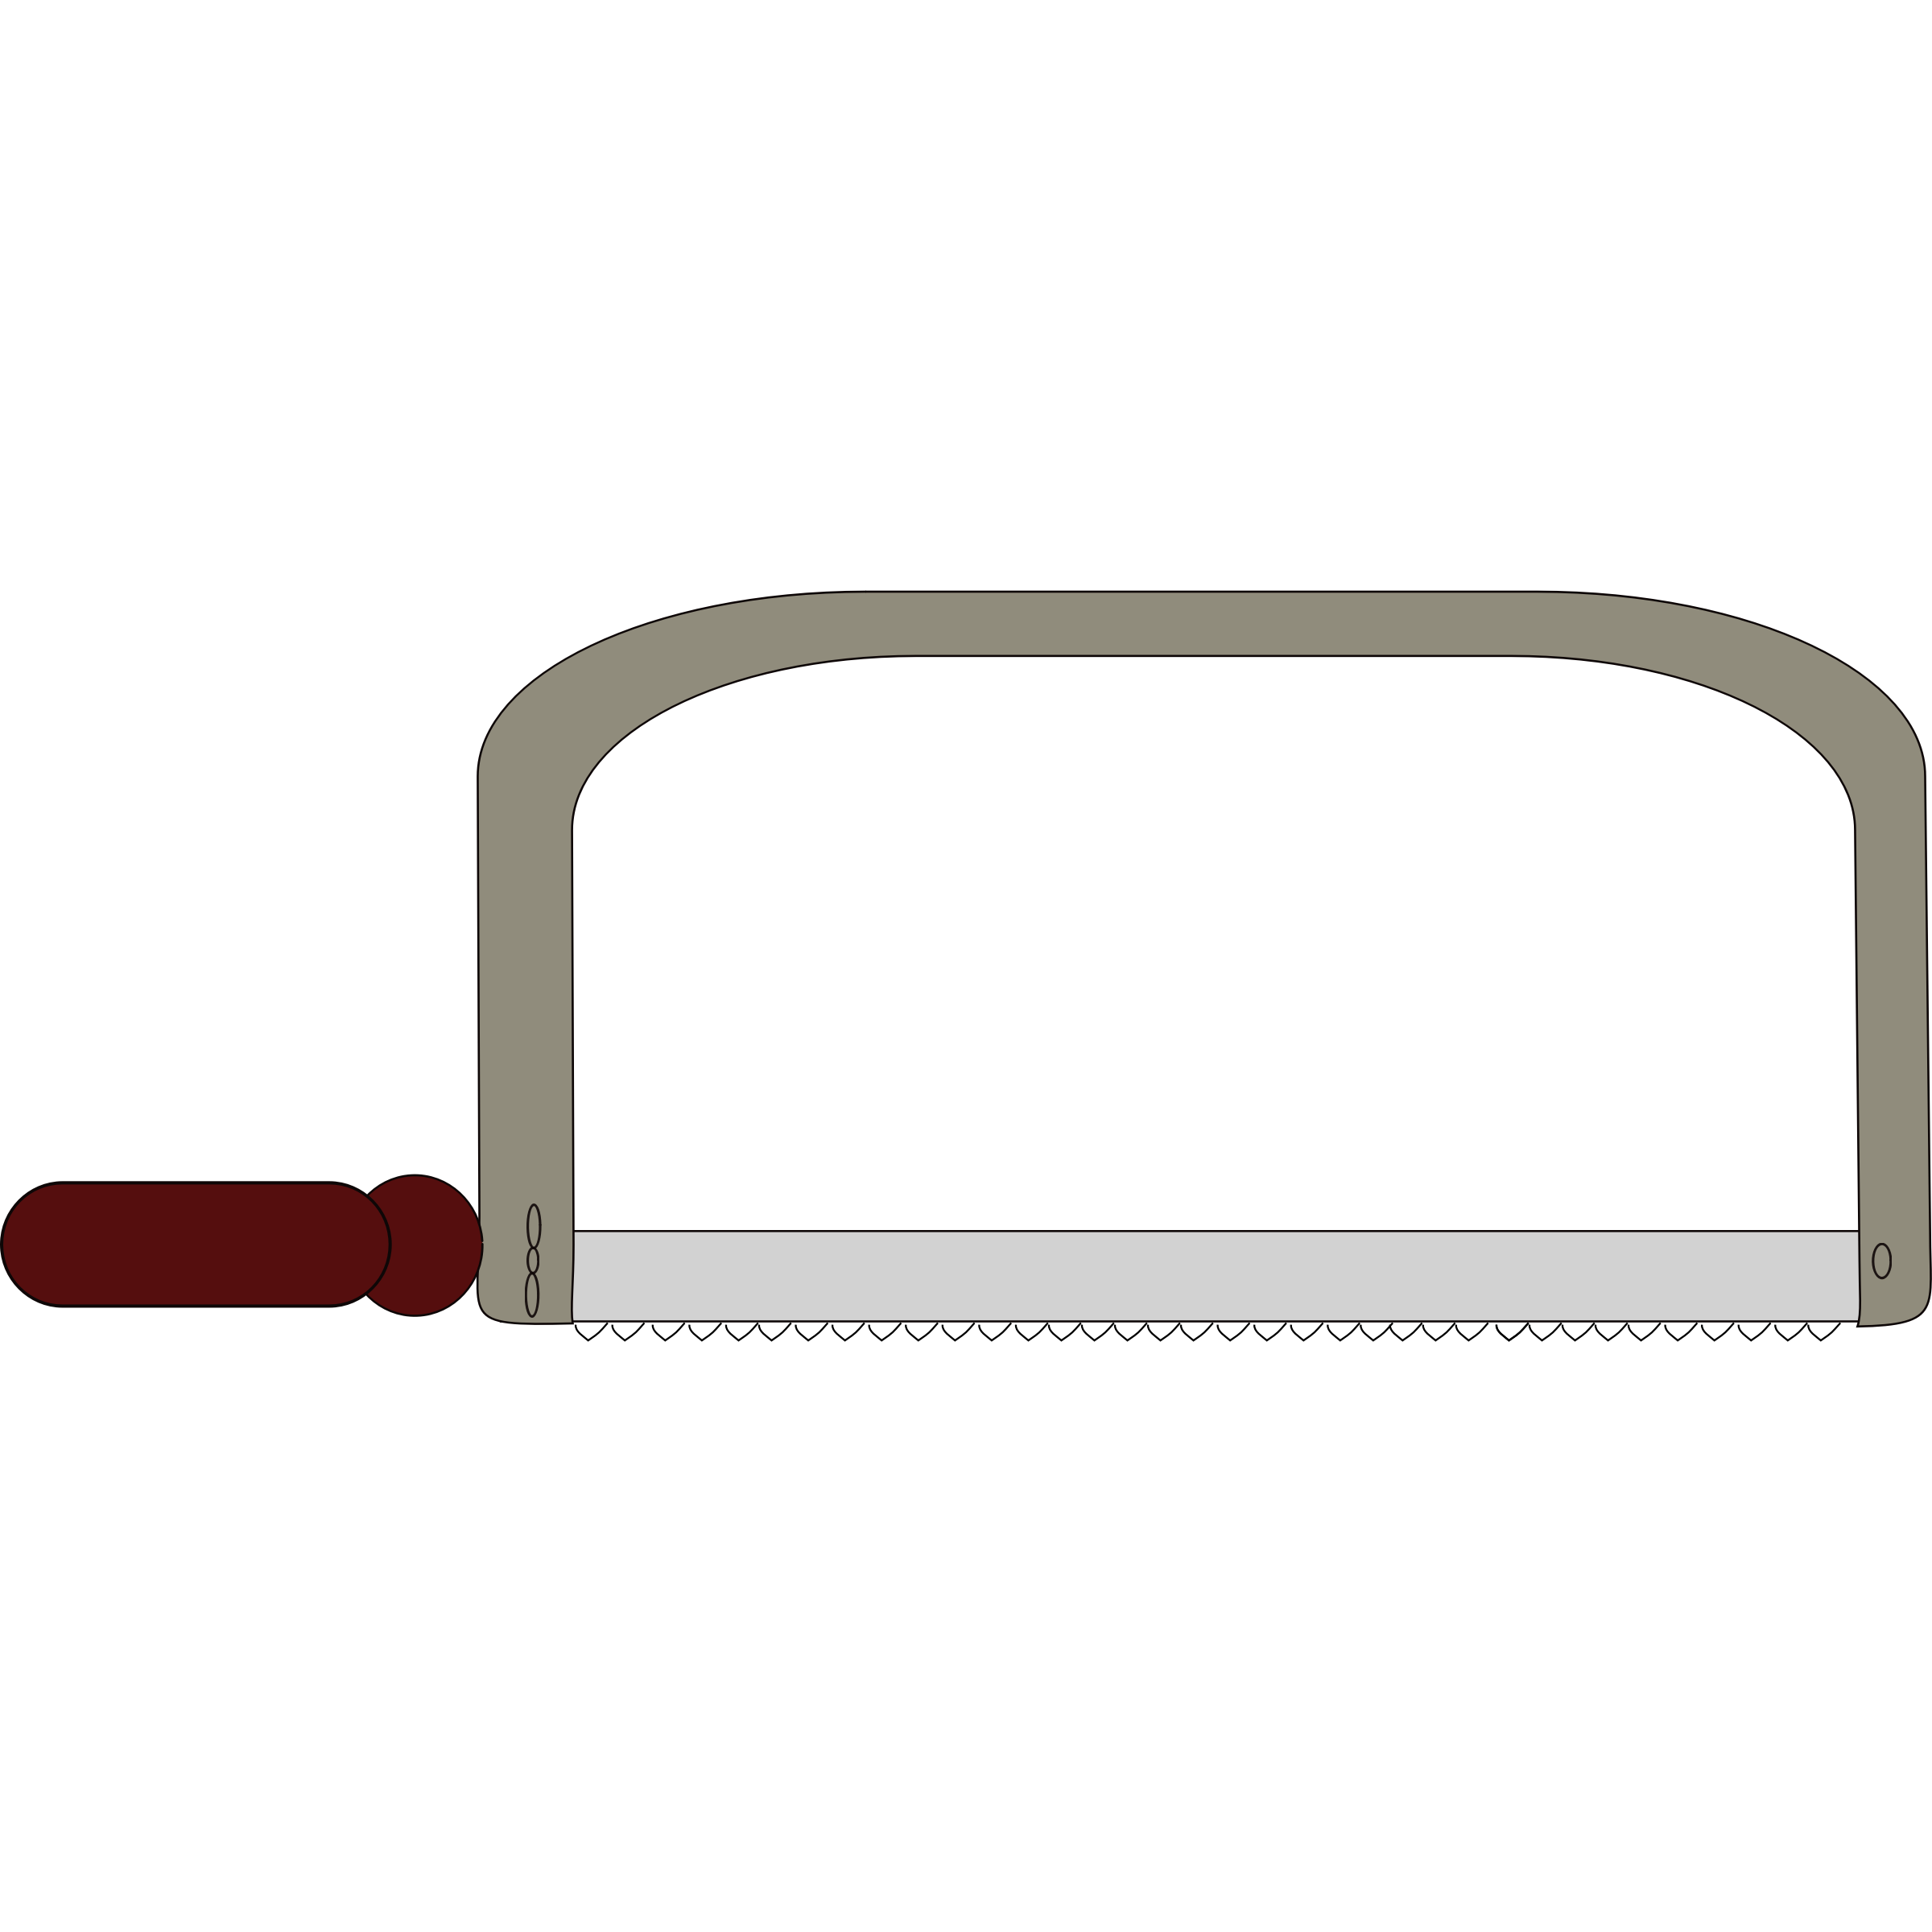 Other Clipart : Handsaw